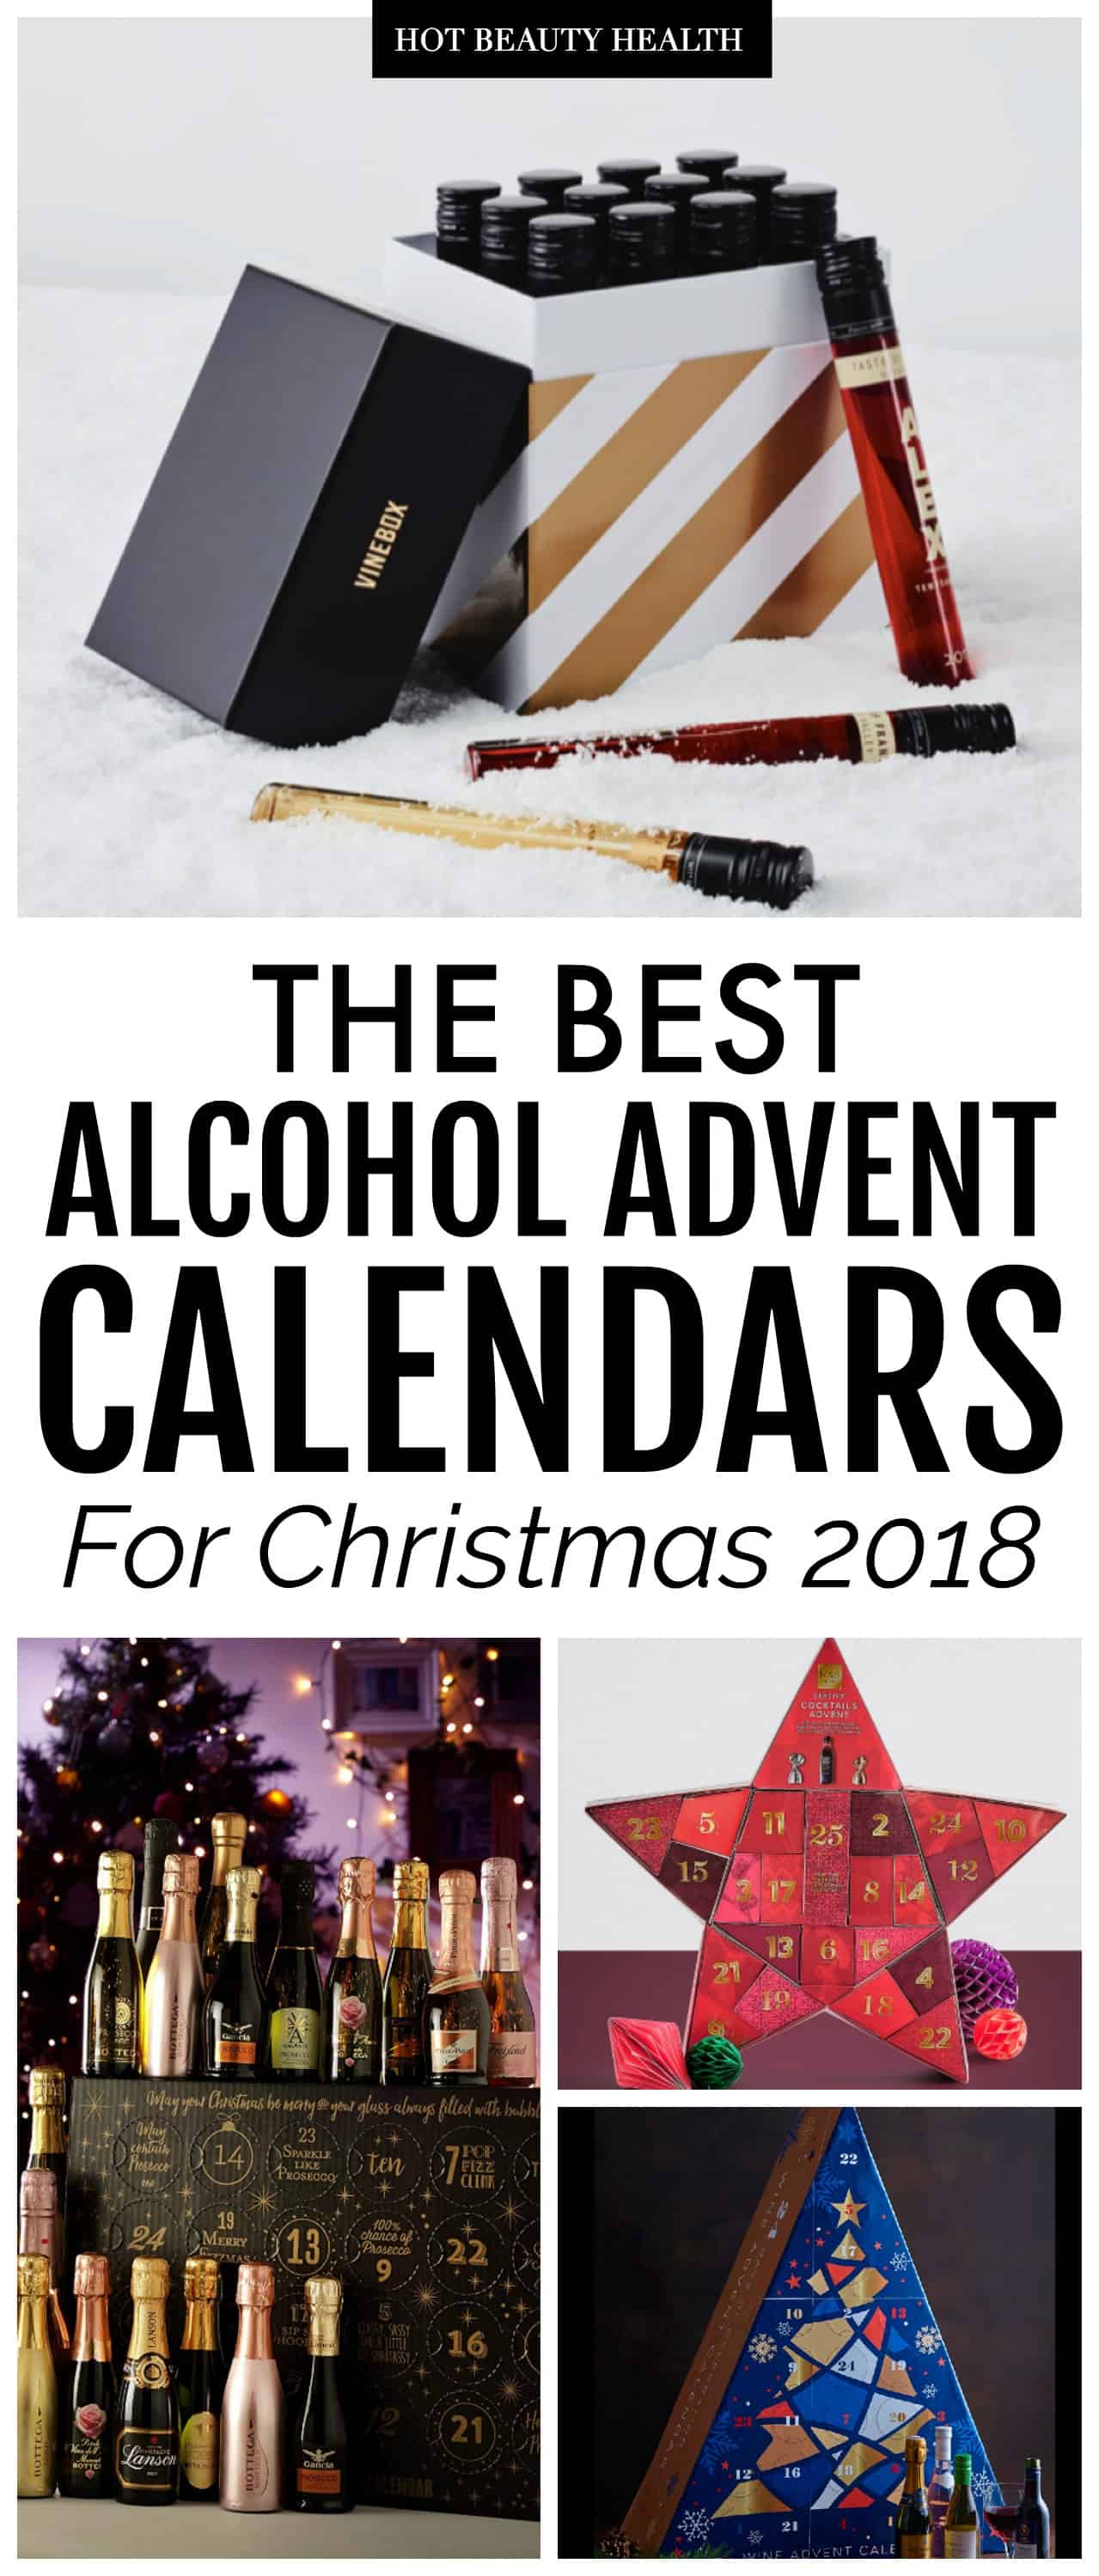 The Best Alcohol Advent Calendars Worth Buying For Christmas